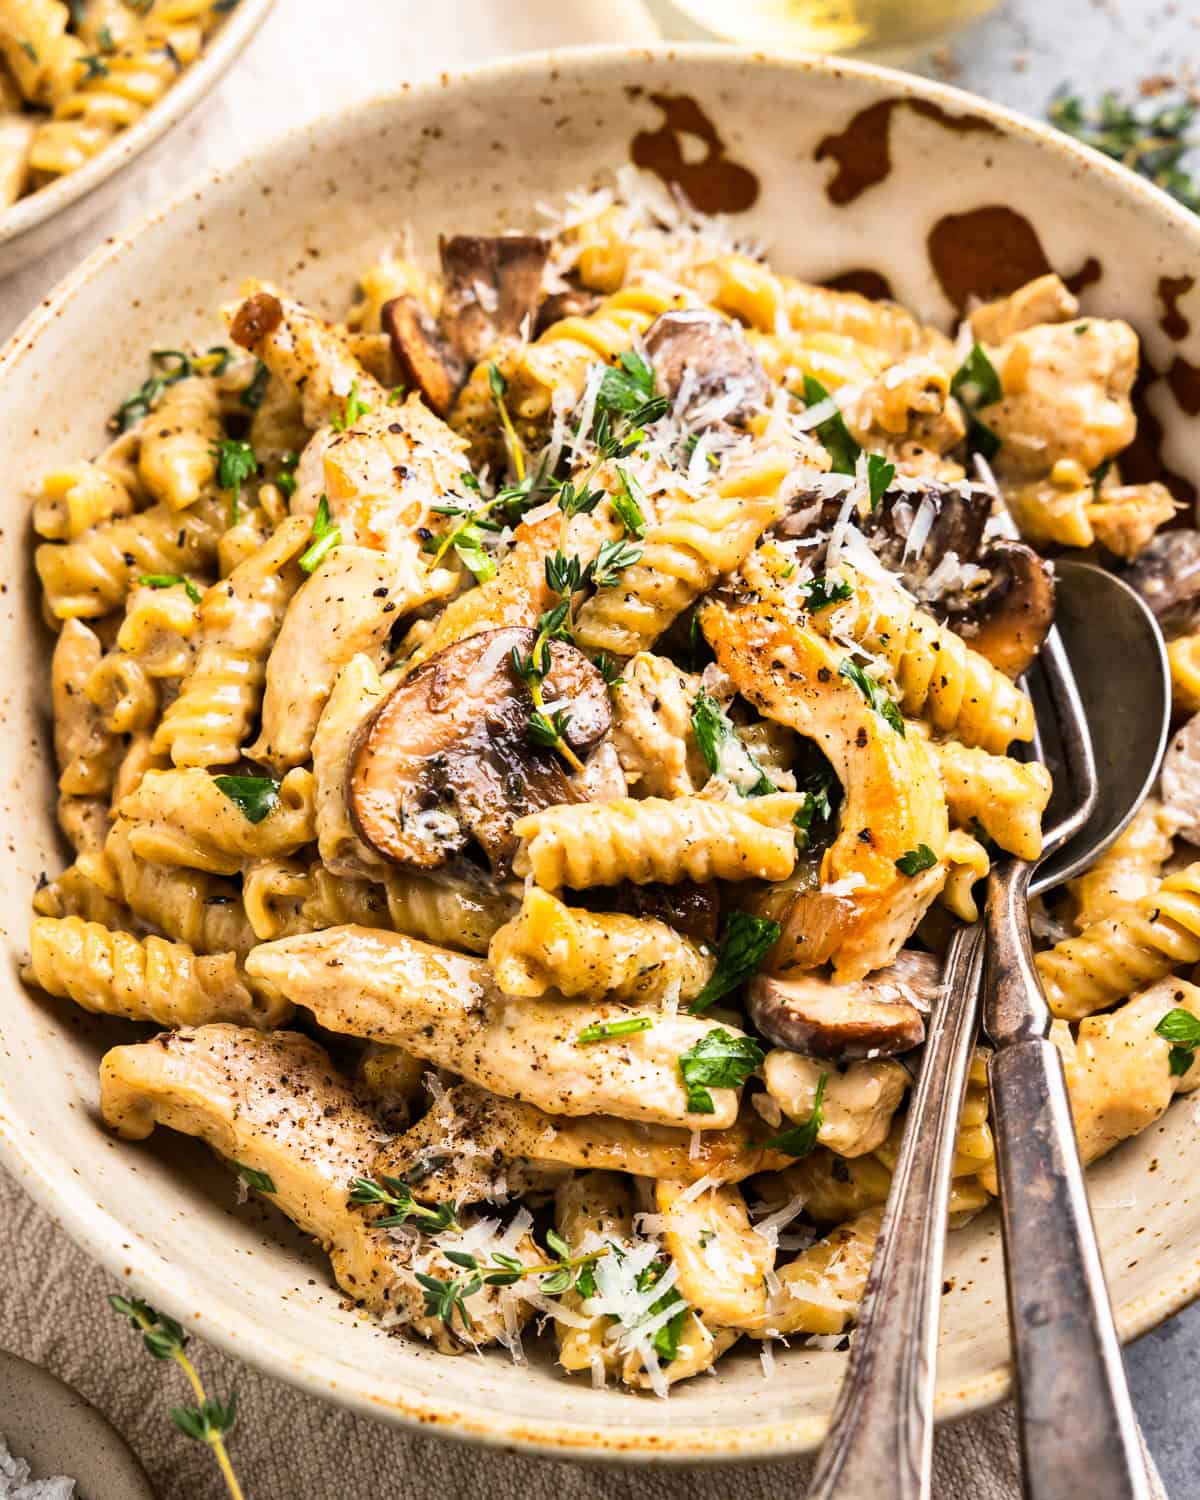 chicken mushroom pasta in a bowl with a fork and spoon.